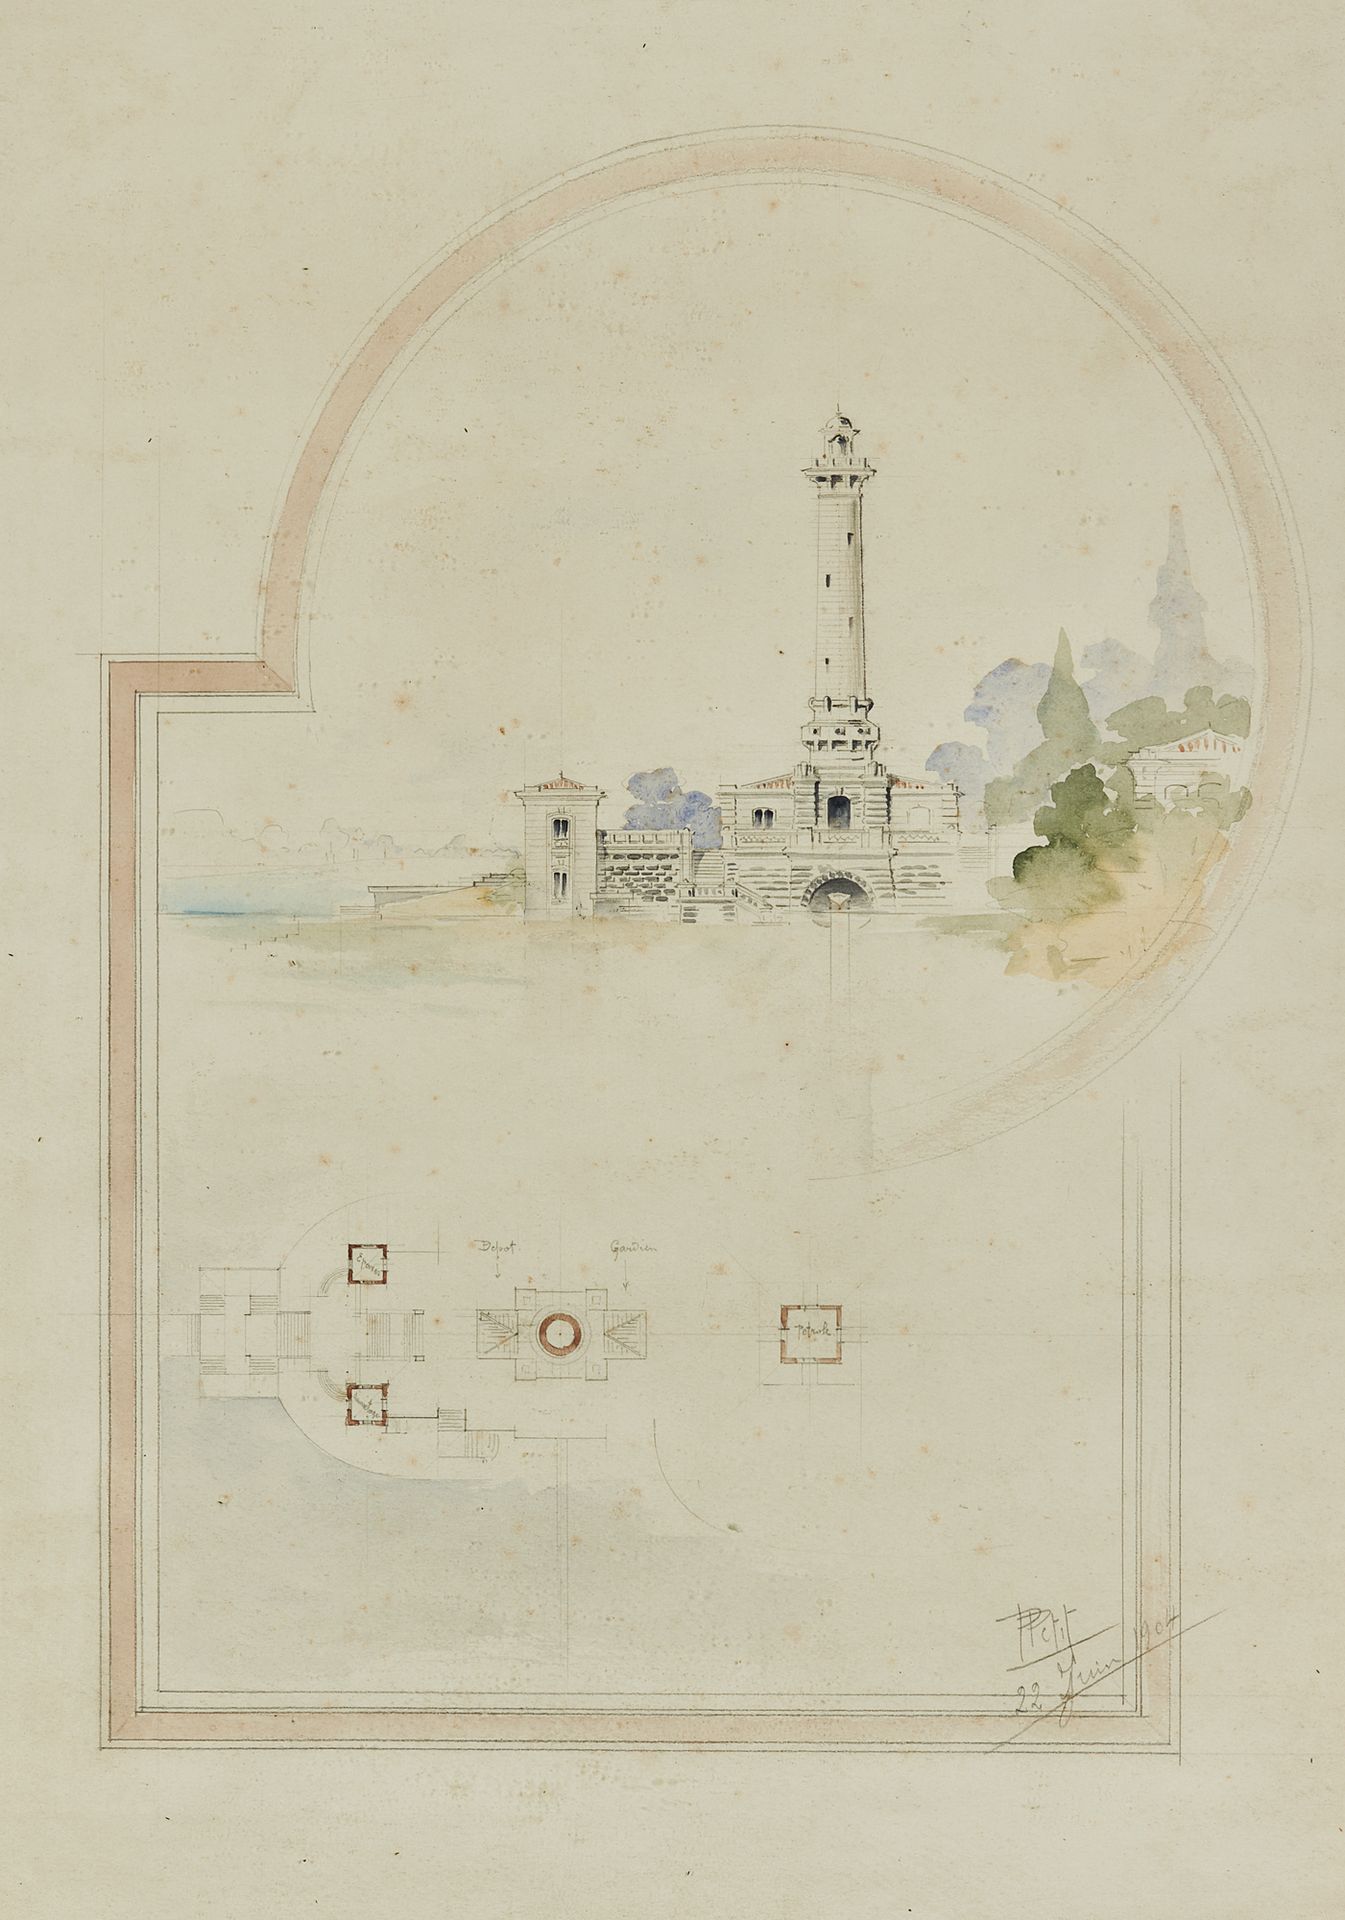 P. PETIT View of a land lighthouse with its interior plan
Watercolor on paper, s&hellip;